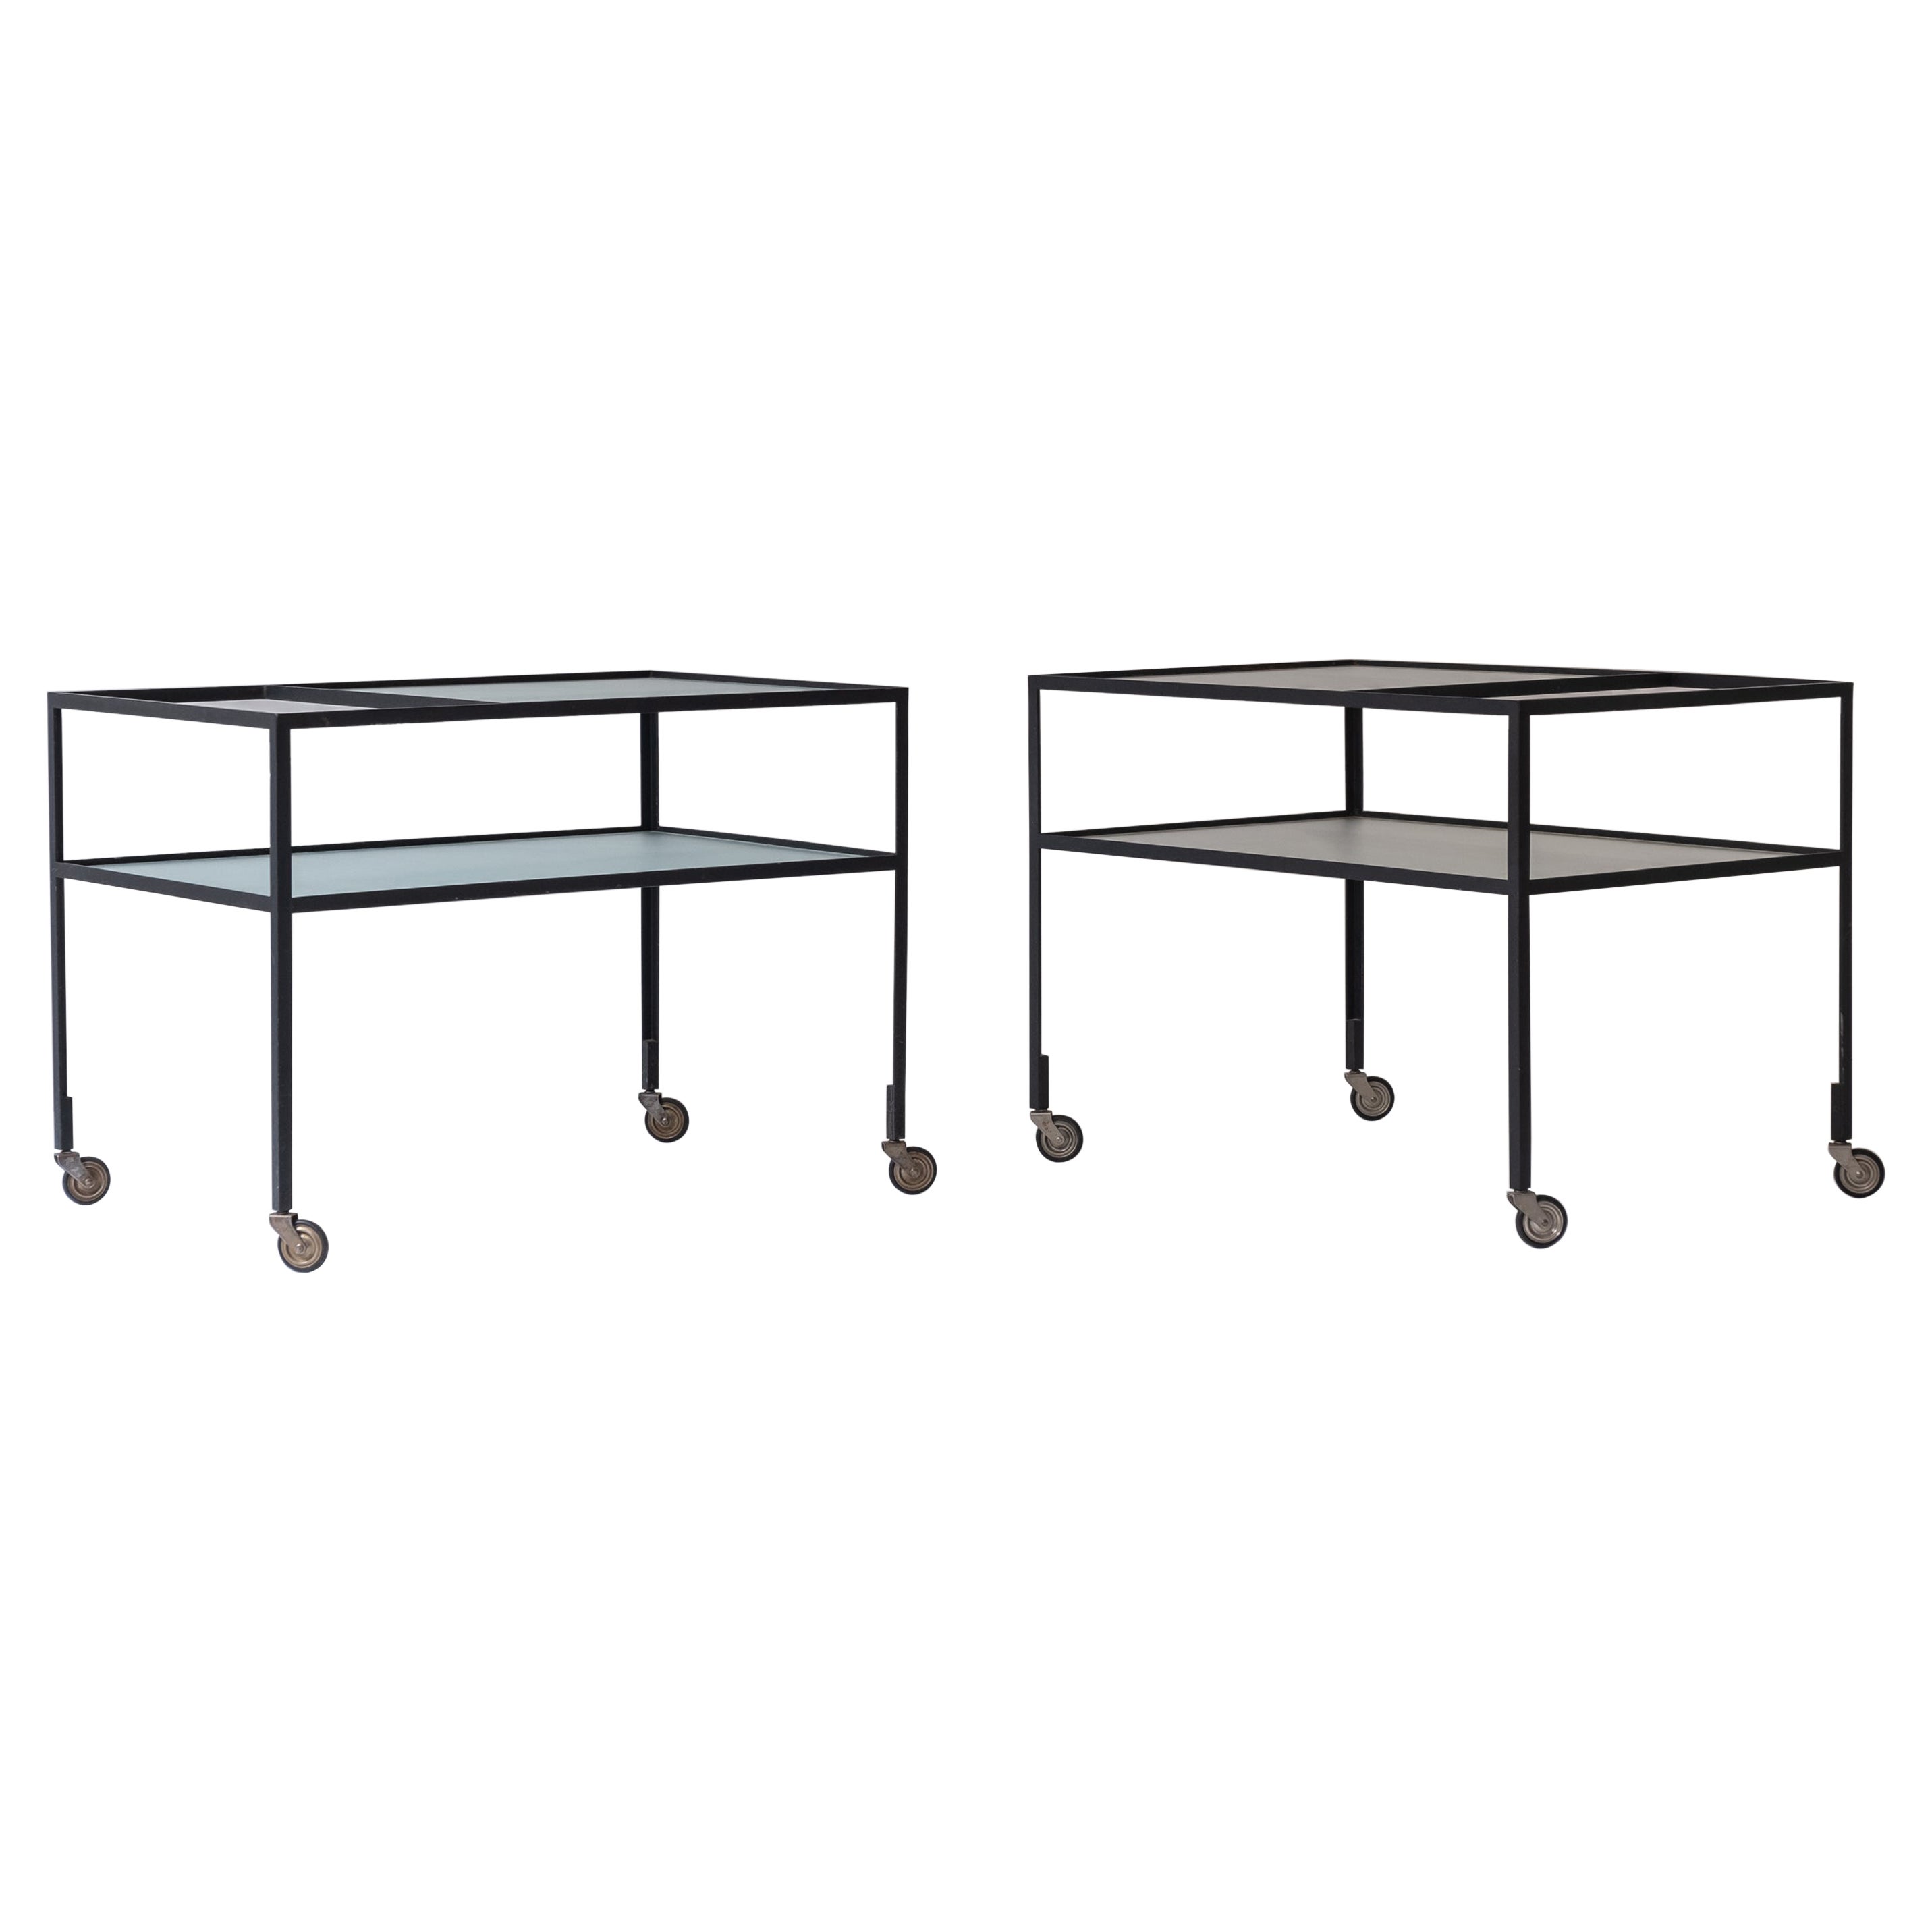 Serving Trolley by Herbert Hirche for Christian Holzäpfel KG, Germany, 1956 For Sale